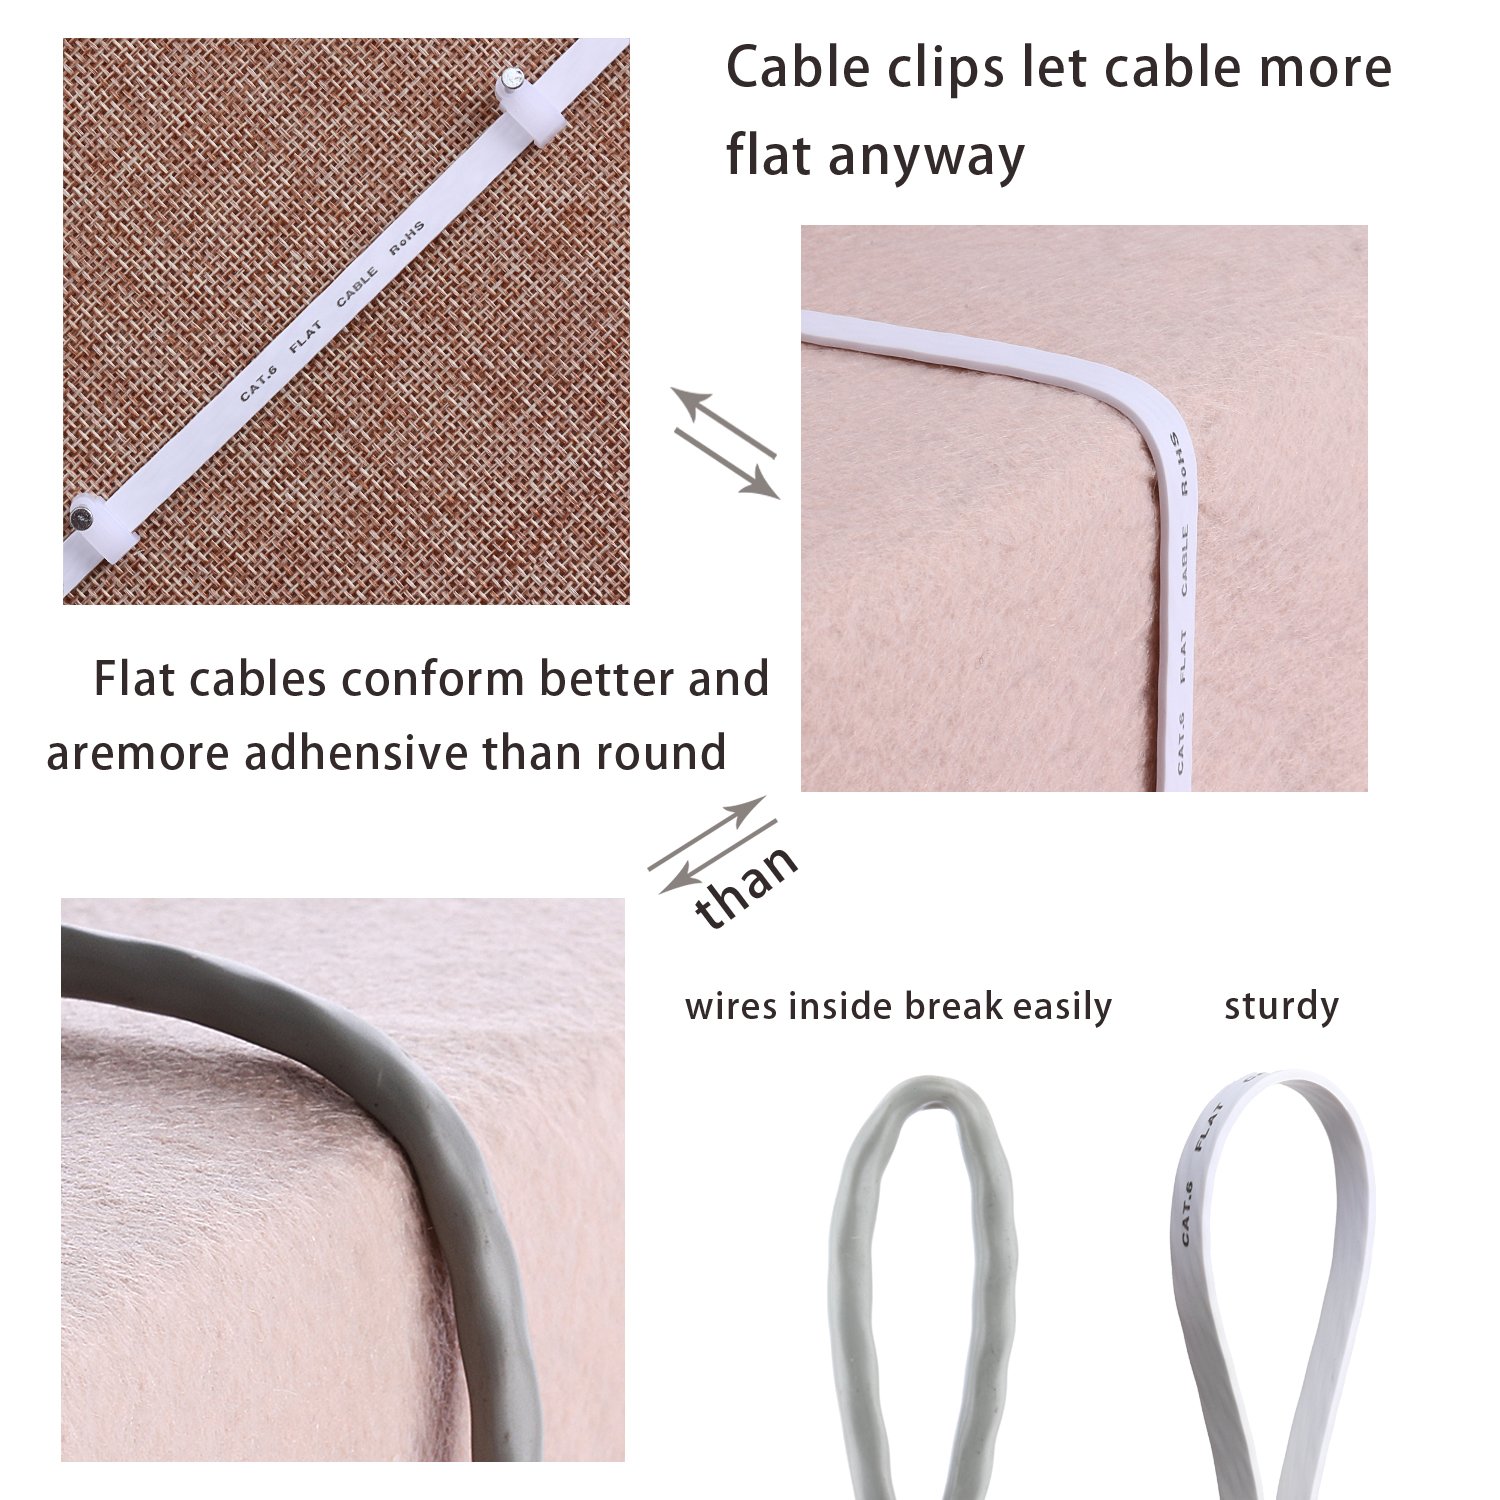 Cat6 Ethernet Cable 10Ft (10Pack), Outdoor&Indoor, 10Gbps Support Cat7 Network, Heavy Duty Flat LAN Internet Patch Cord, Solid Weatherproof High Speed Cable for Router, Modem, Switch, Xbox, PS4, White